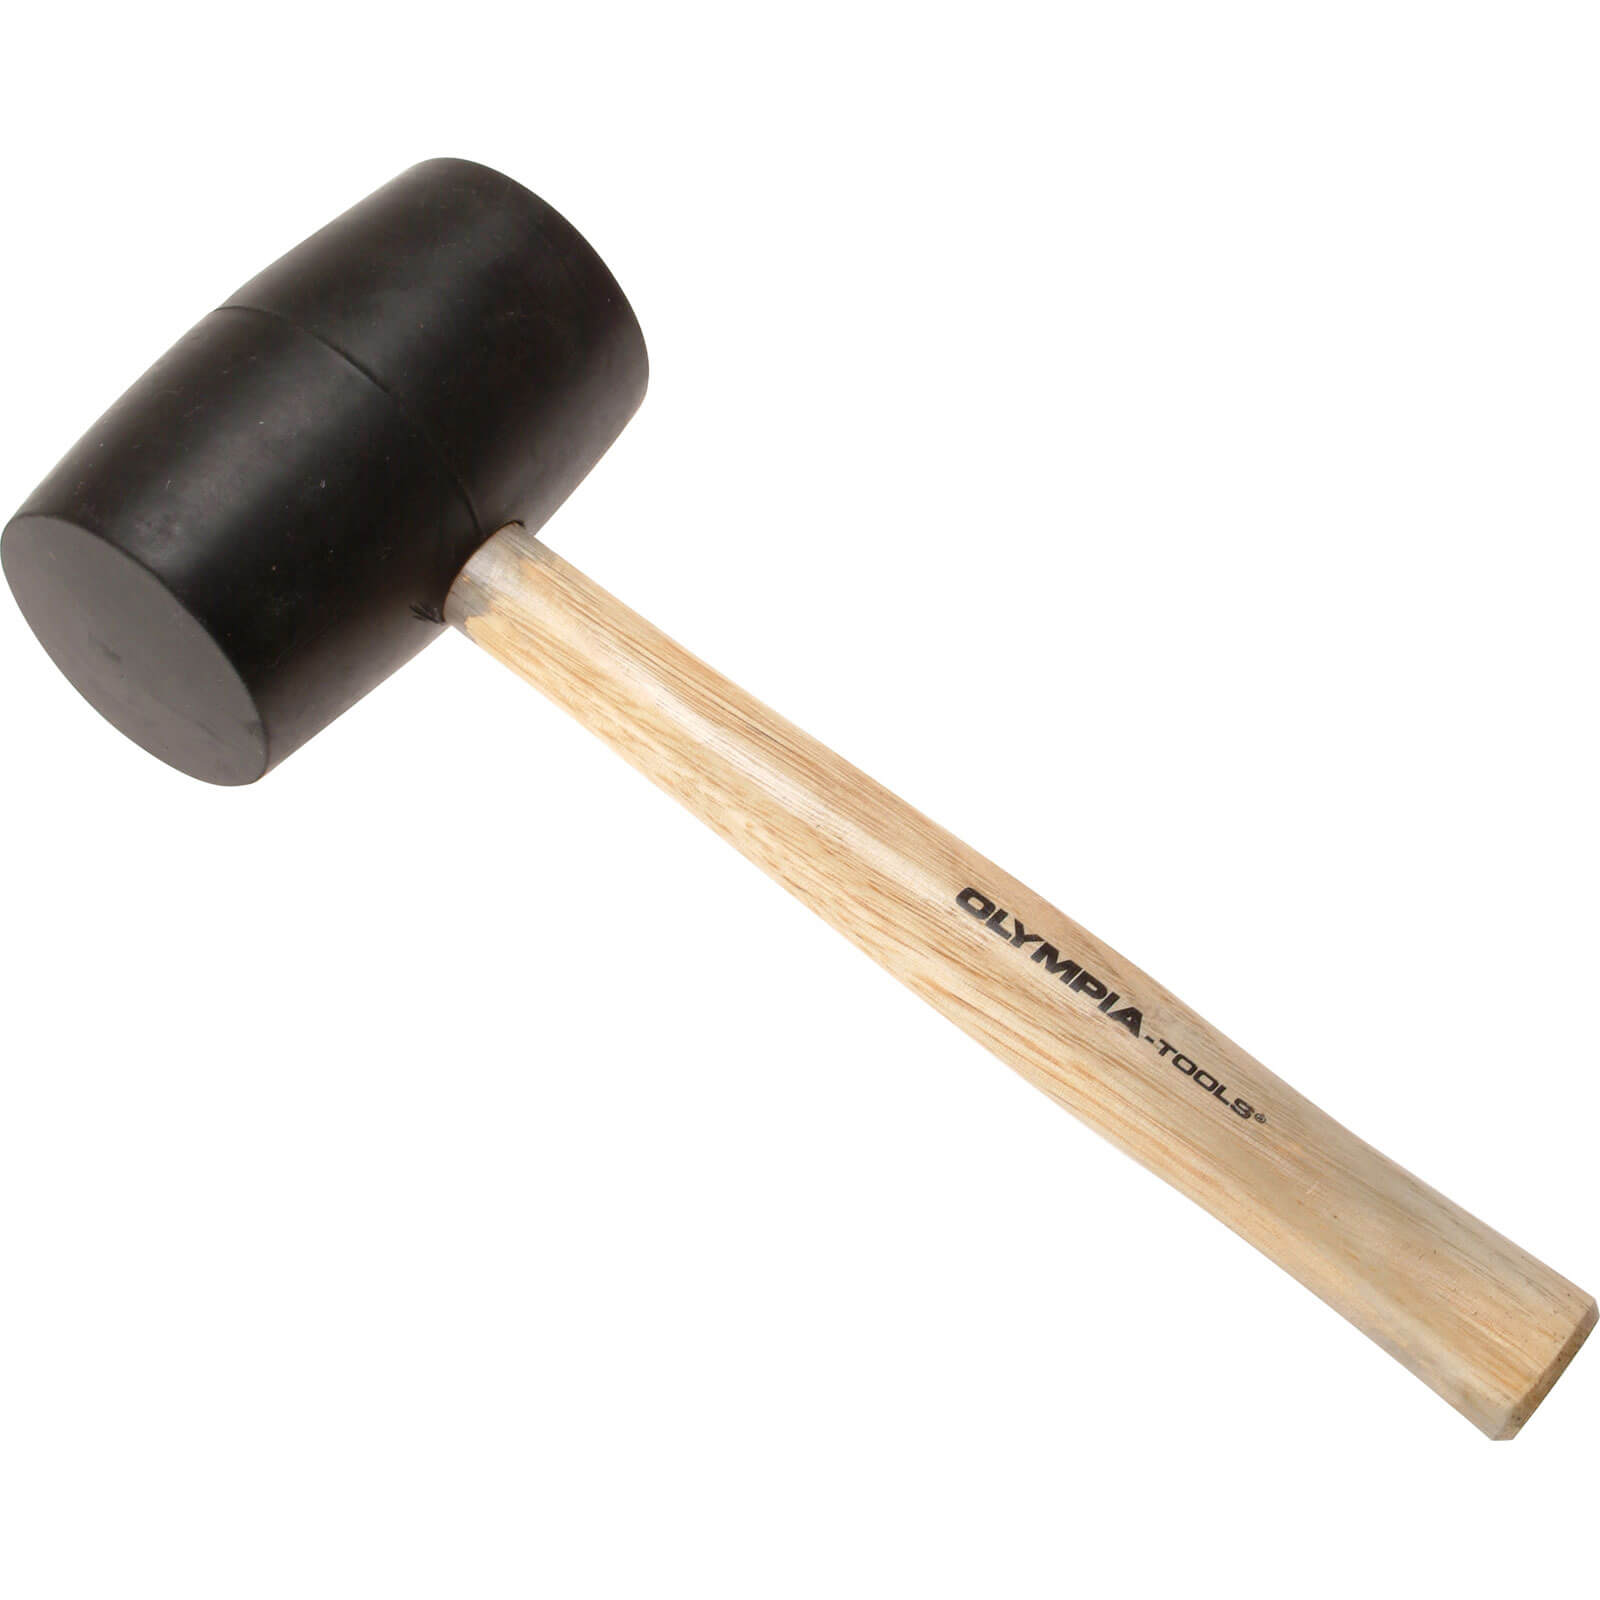 Olympia Rubber Mallet 680g / 24oz